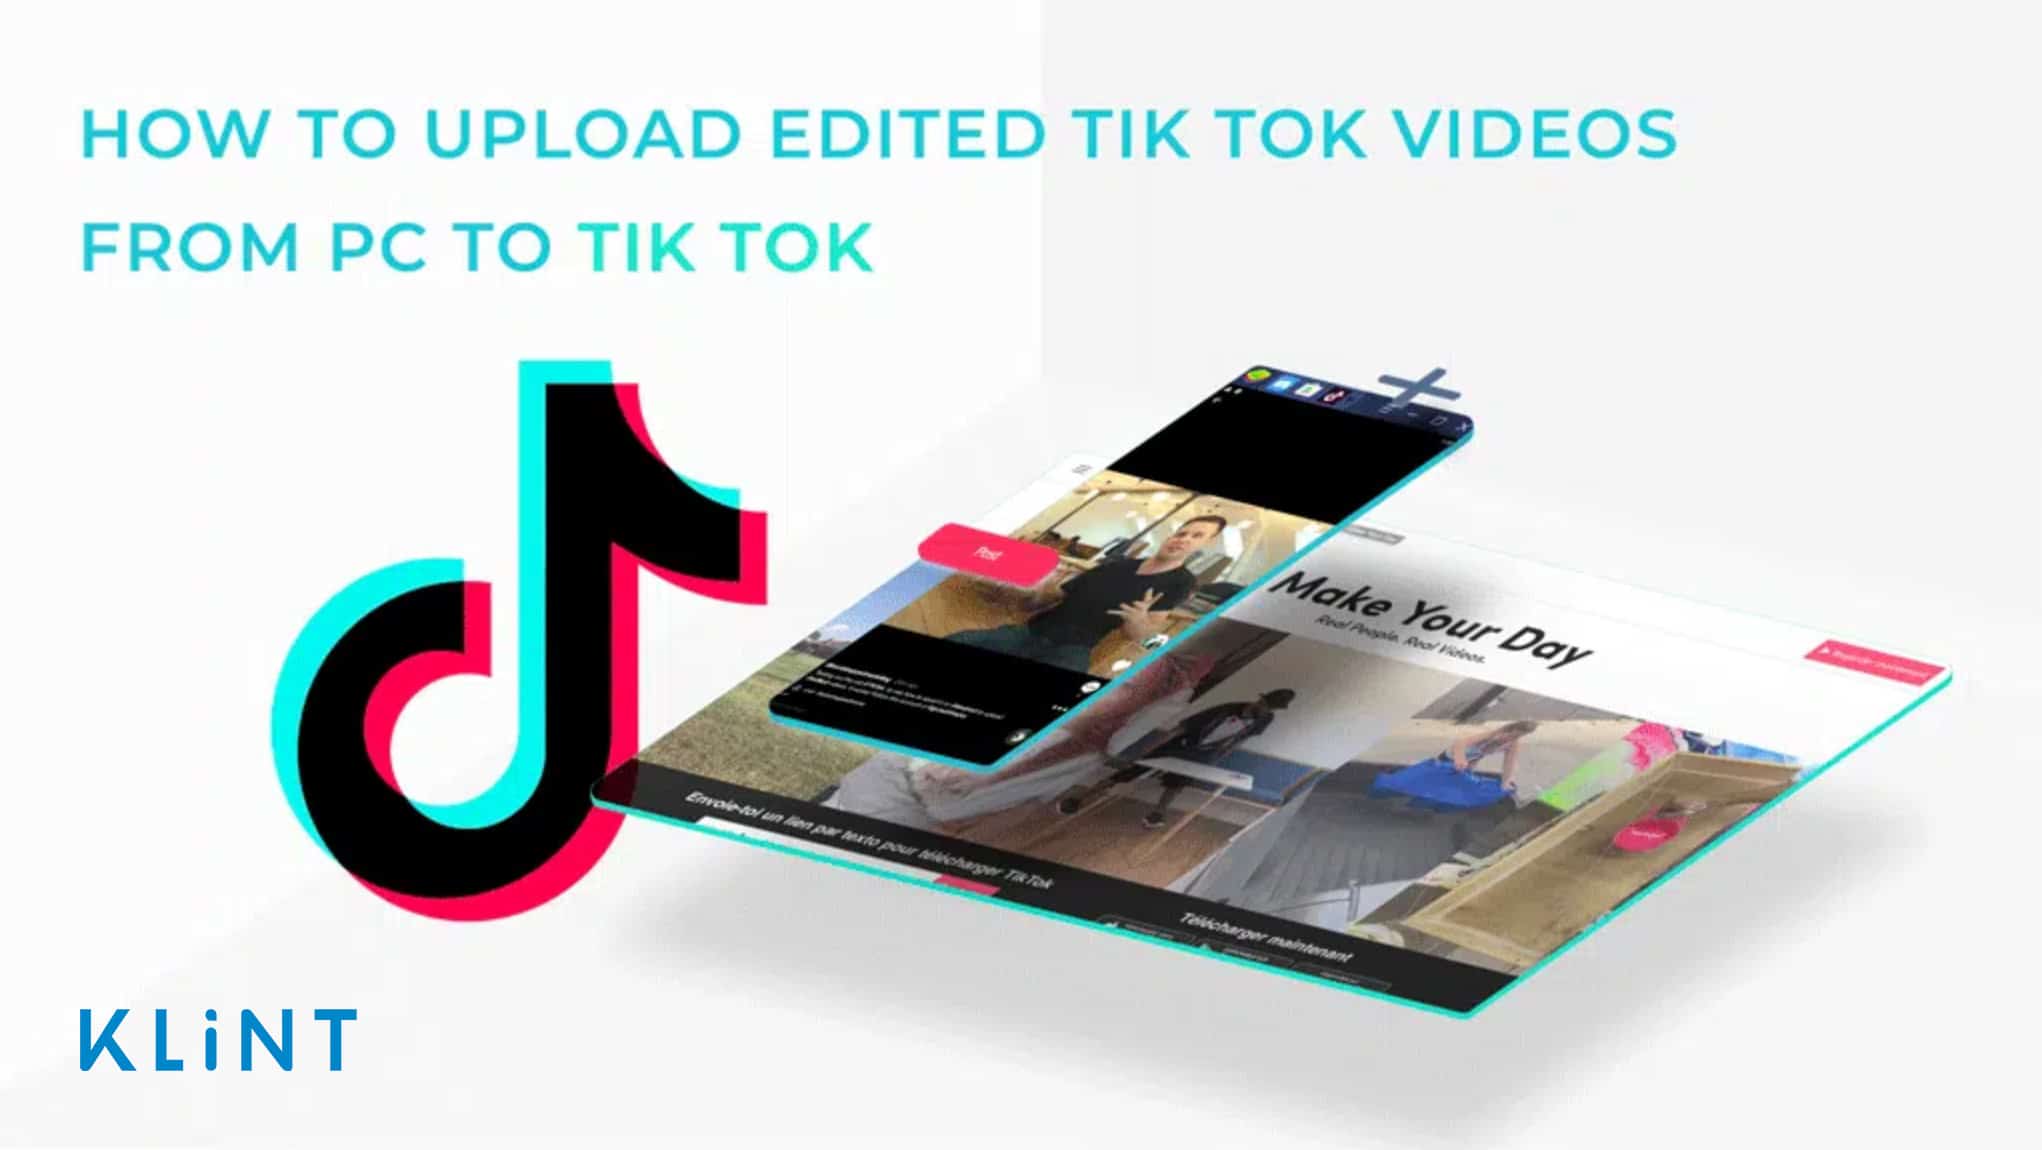 tiktok logo and webpages against white background